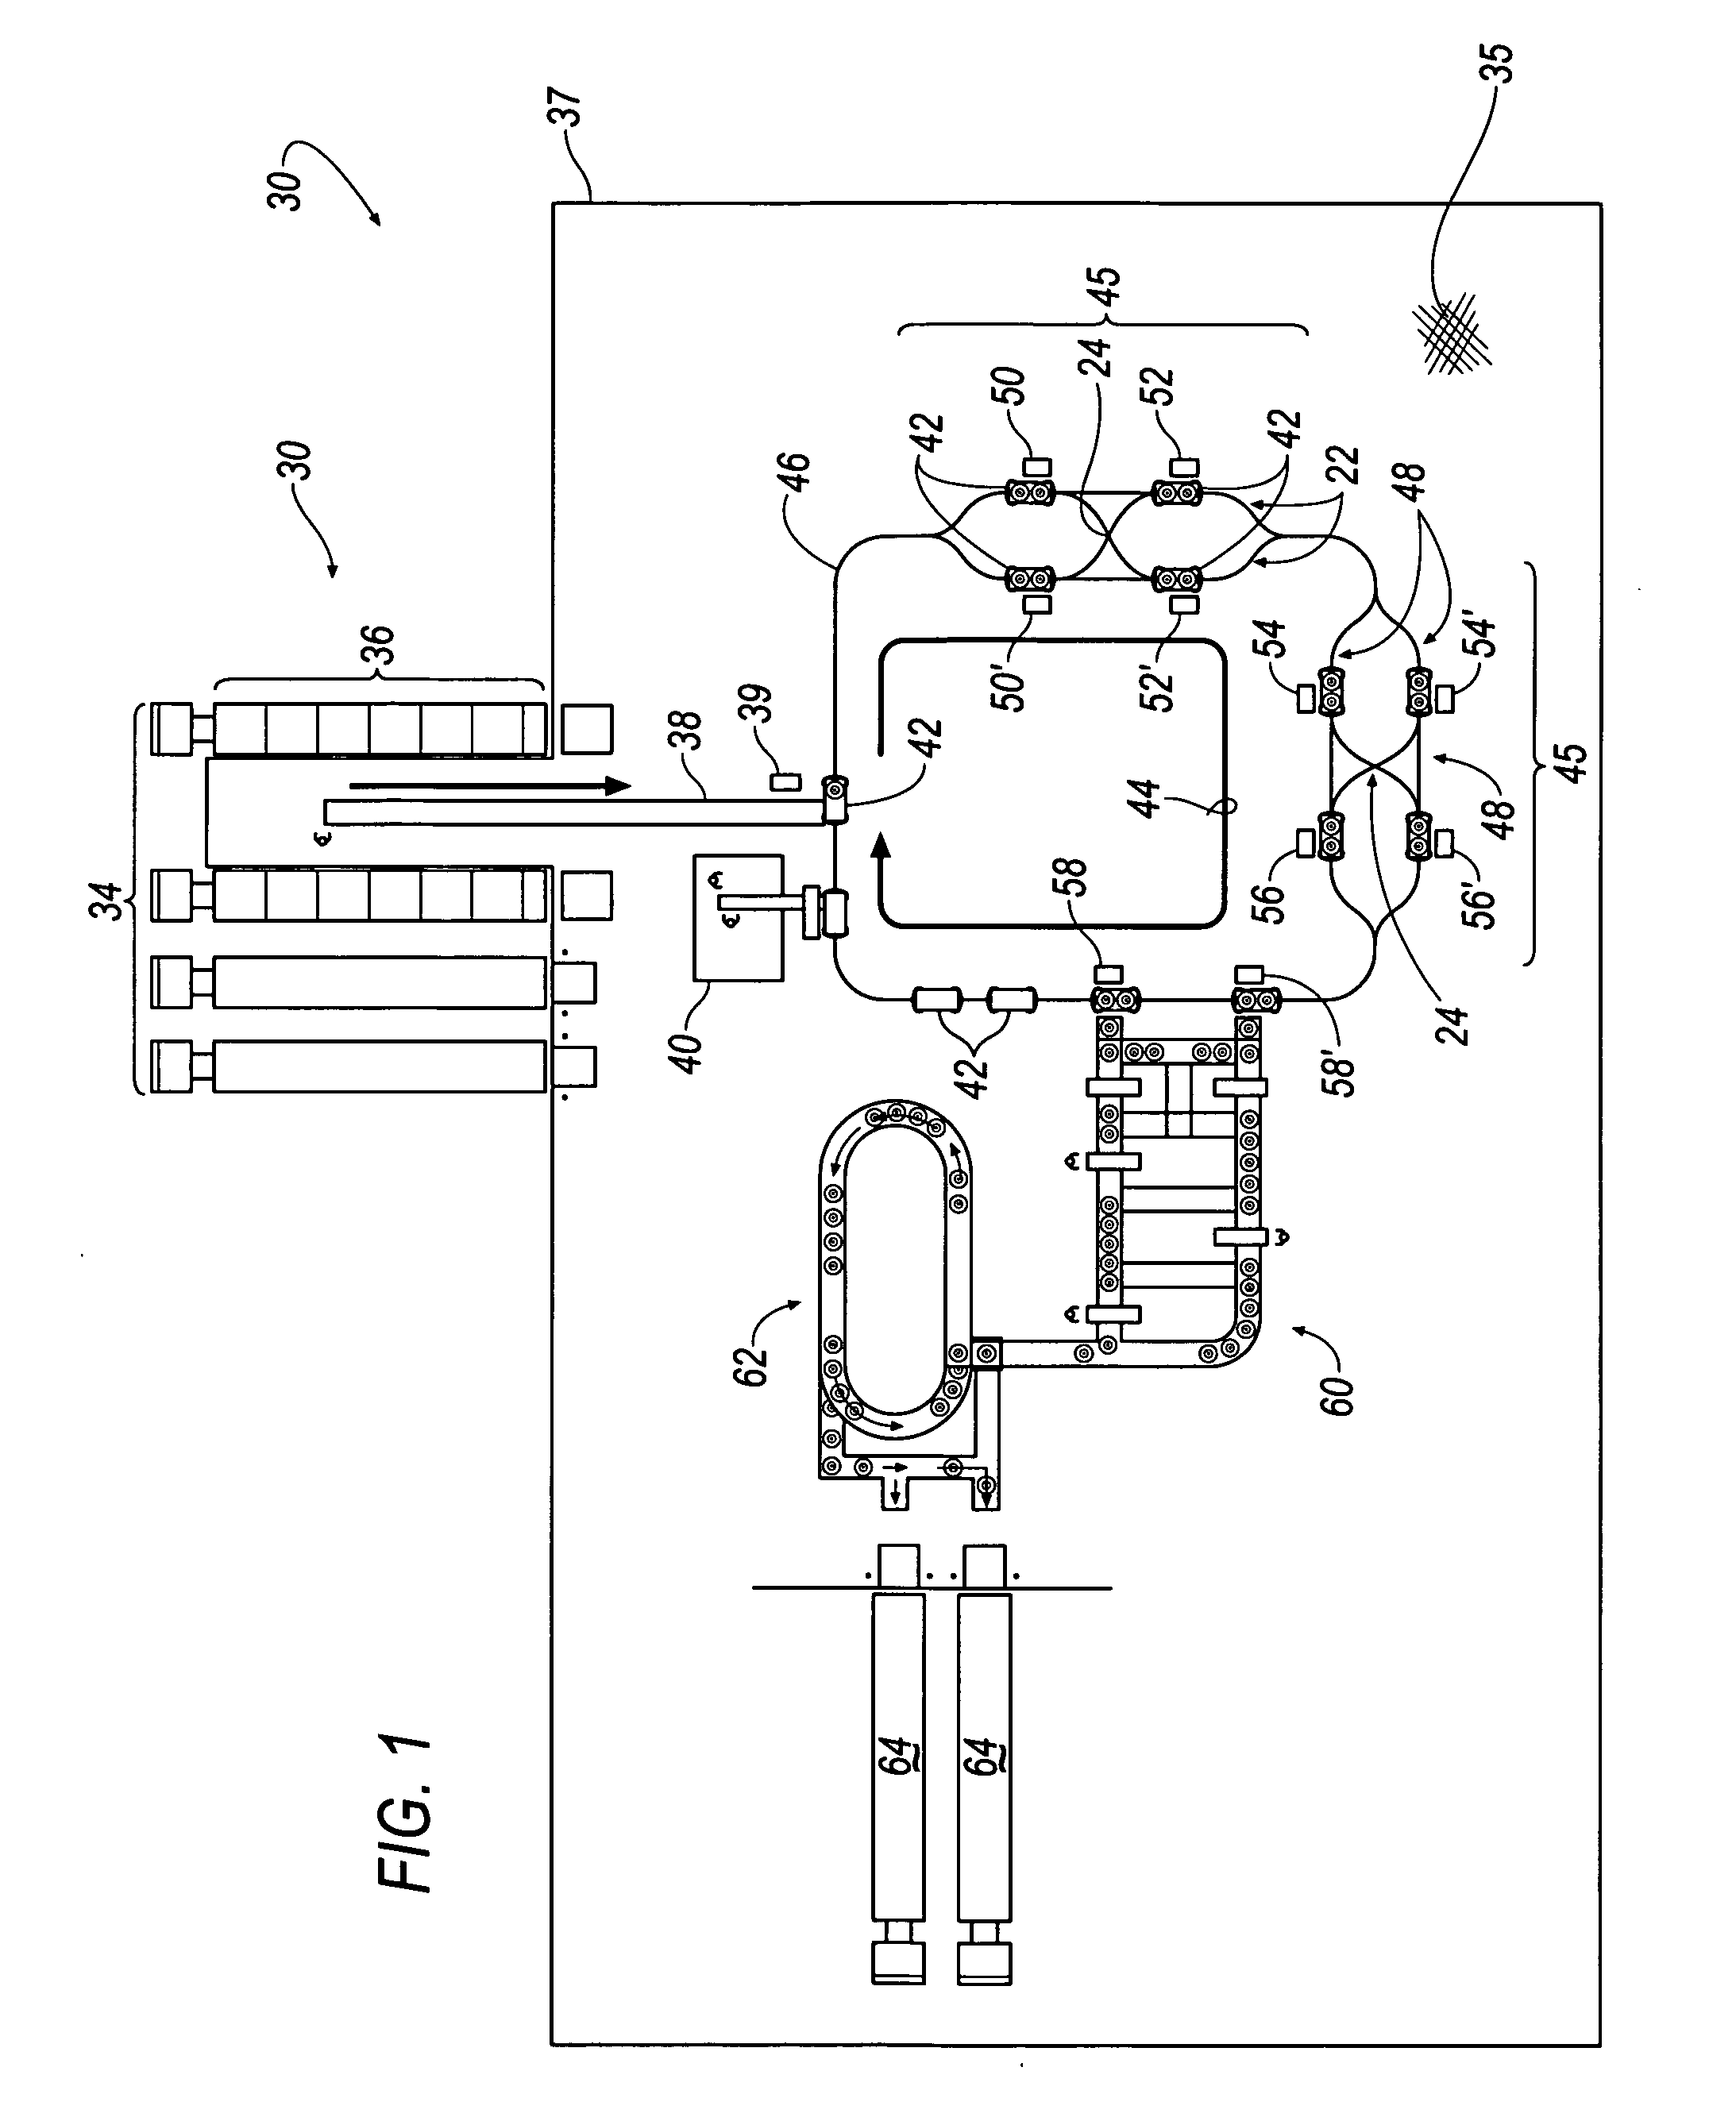 System for transporting and manipulating tires and wheels